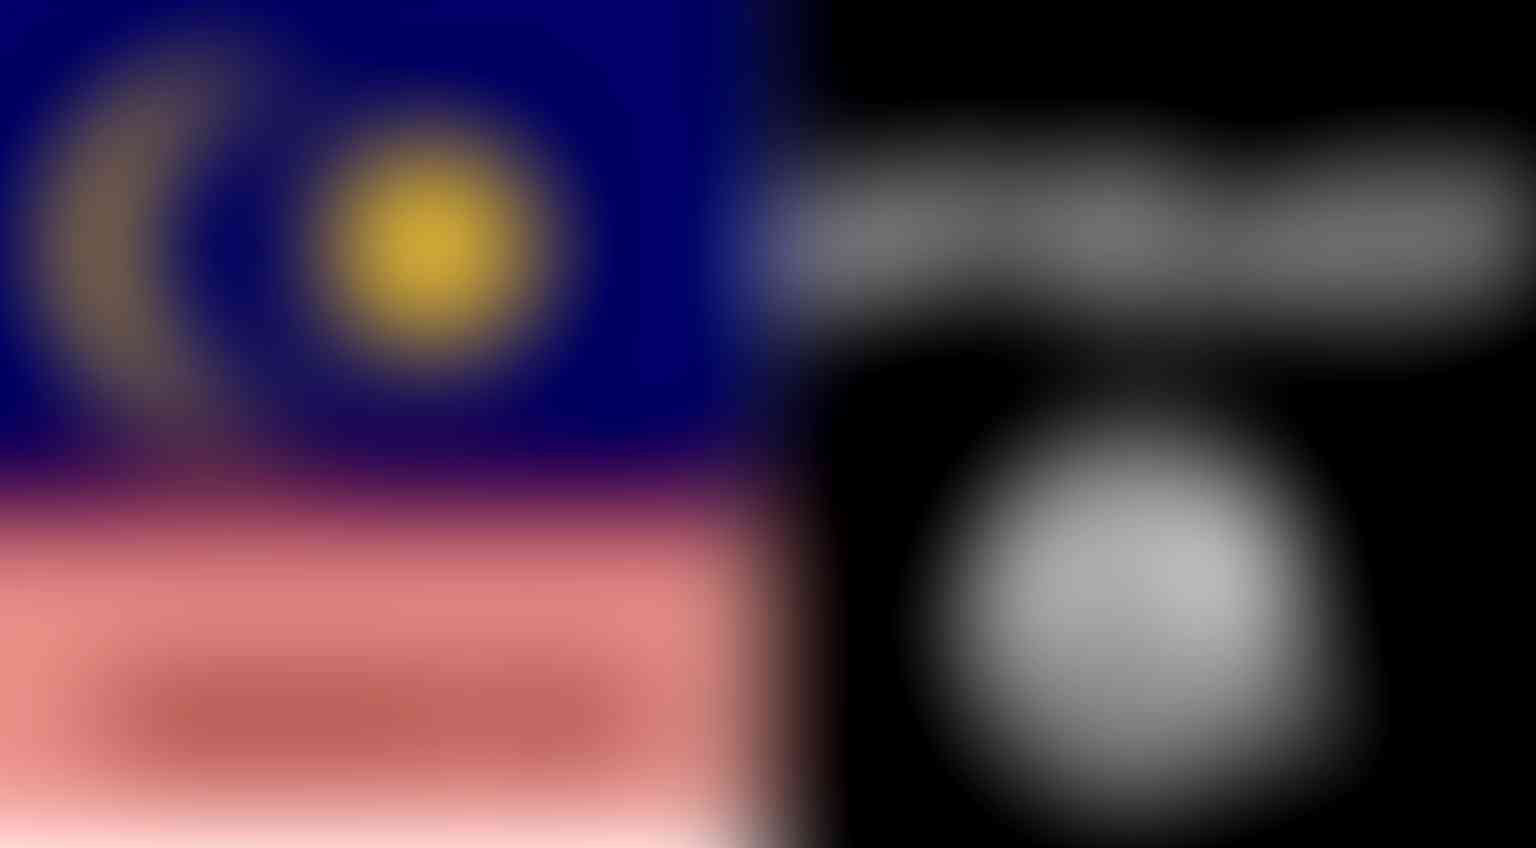 Kansas Engineer Reported to FBI After Group Mistakes His Malaysia Flag For ISIS